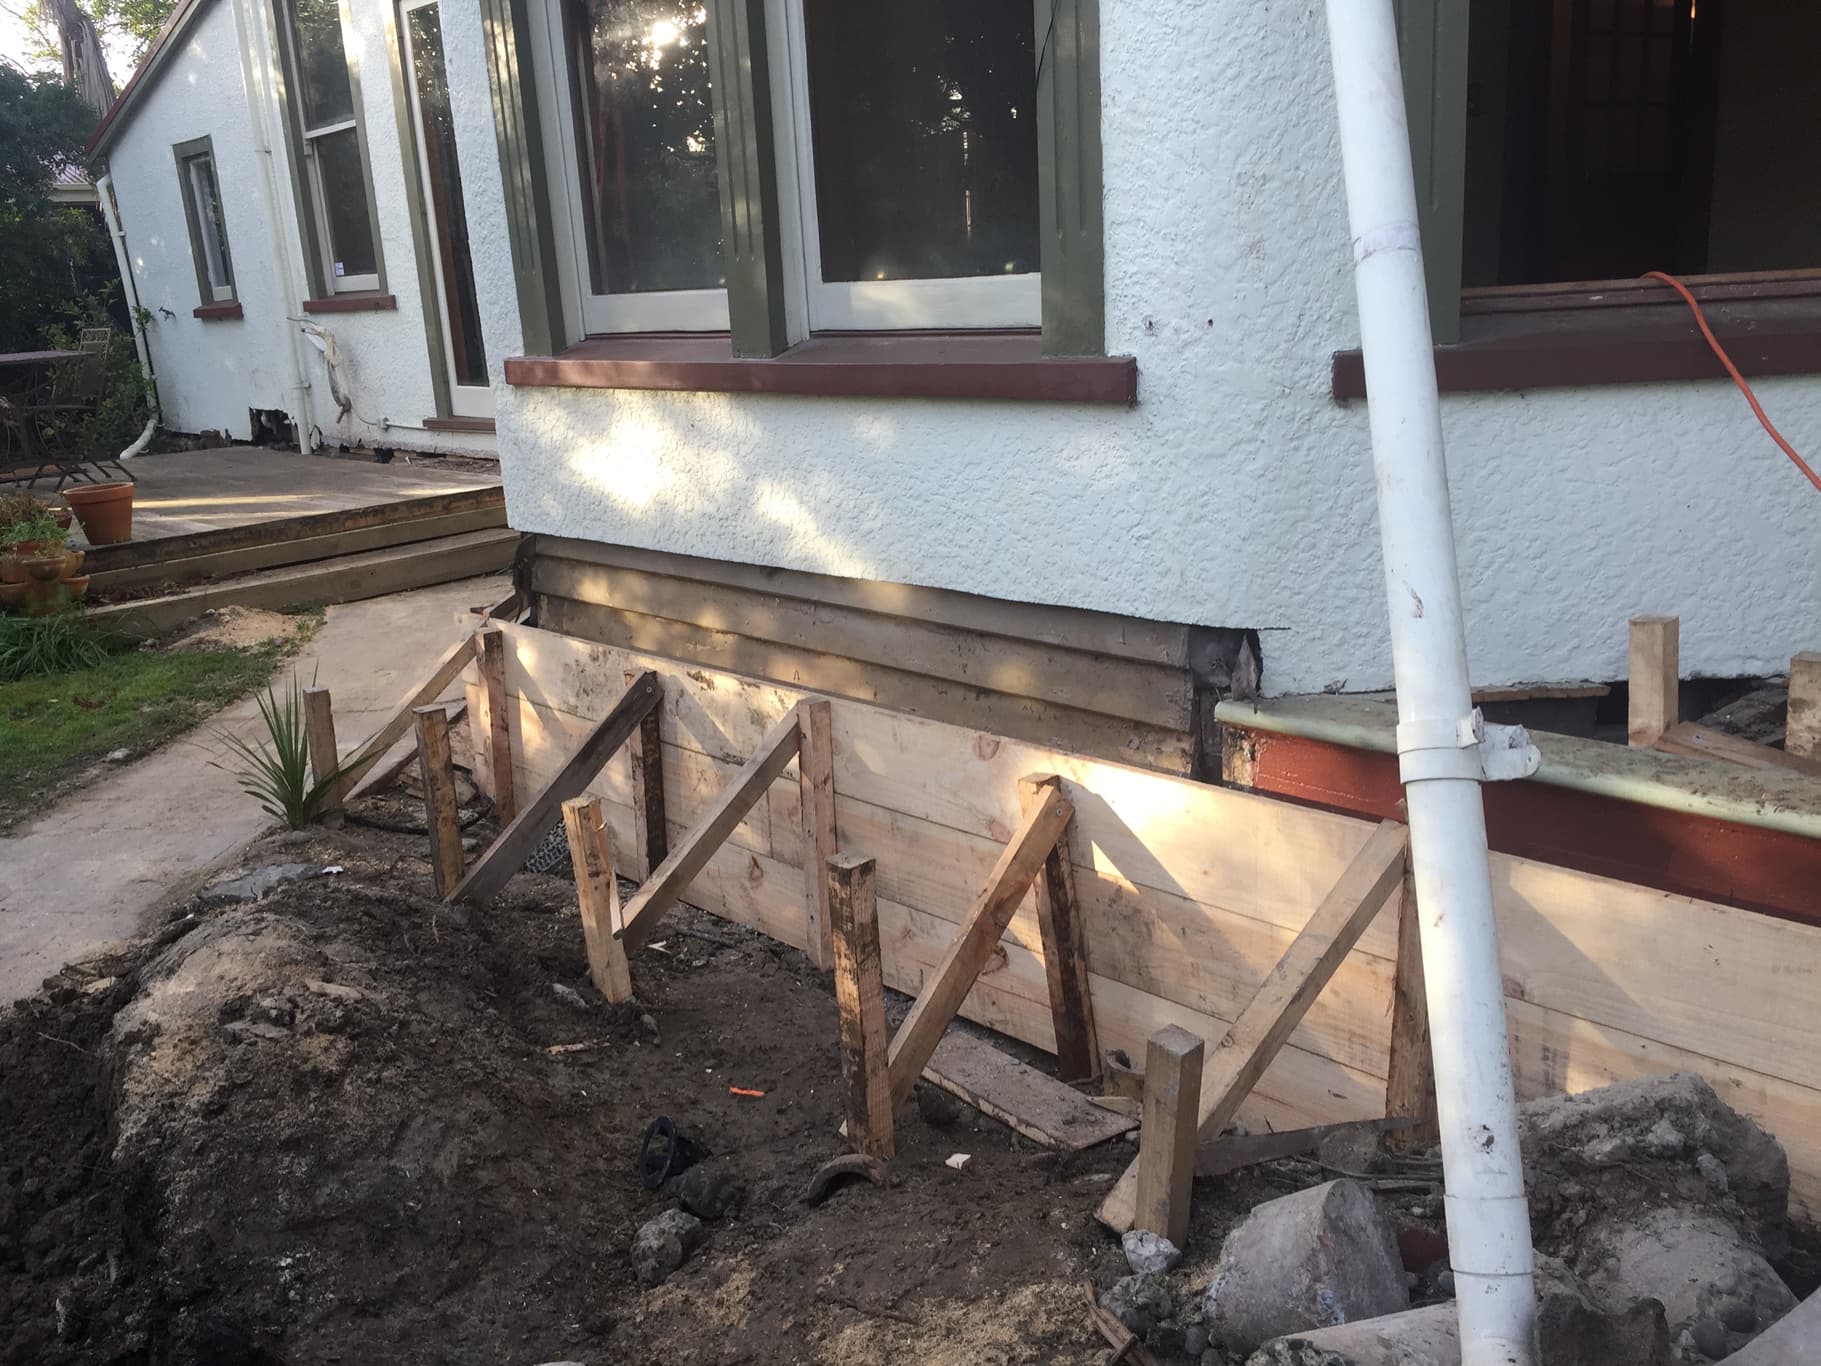 Foundation replacement performed by the Heritage House Relevellers team in Christchurch